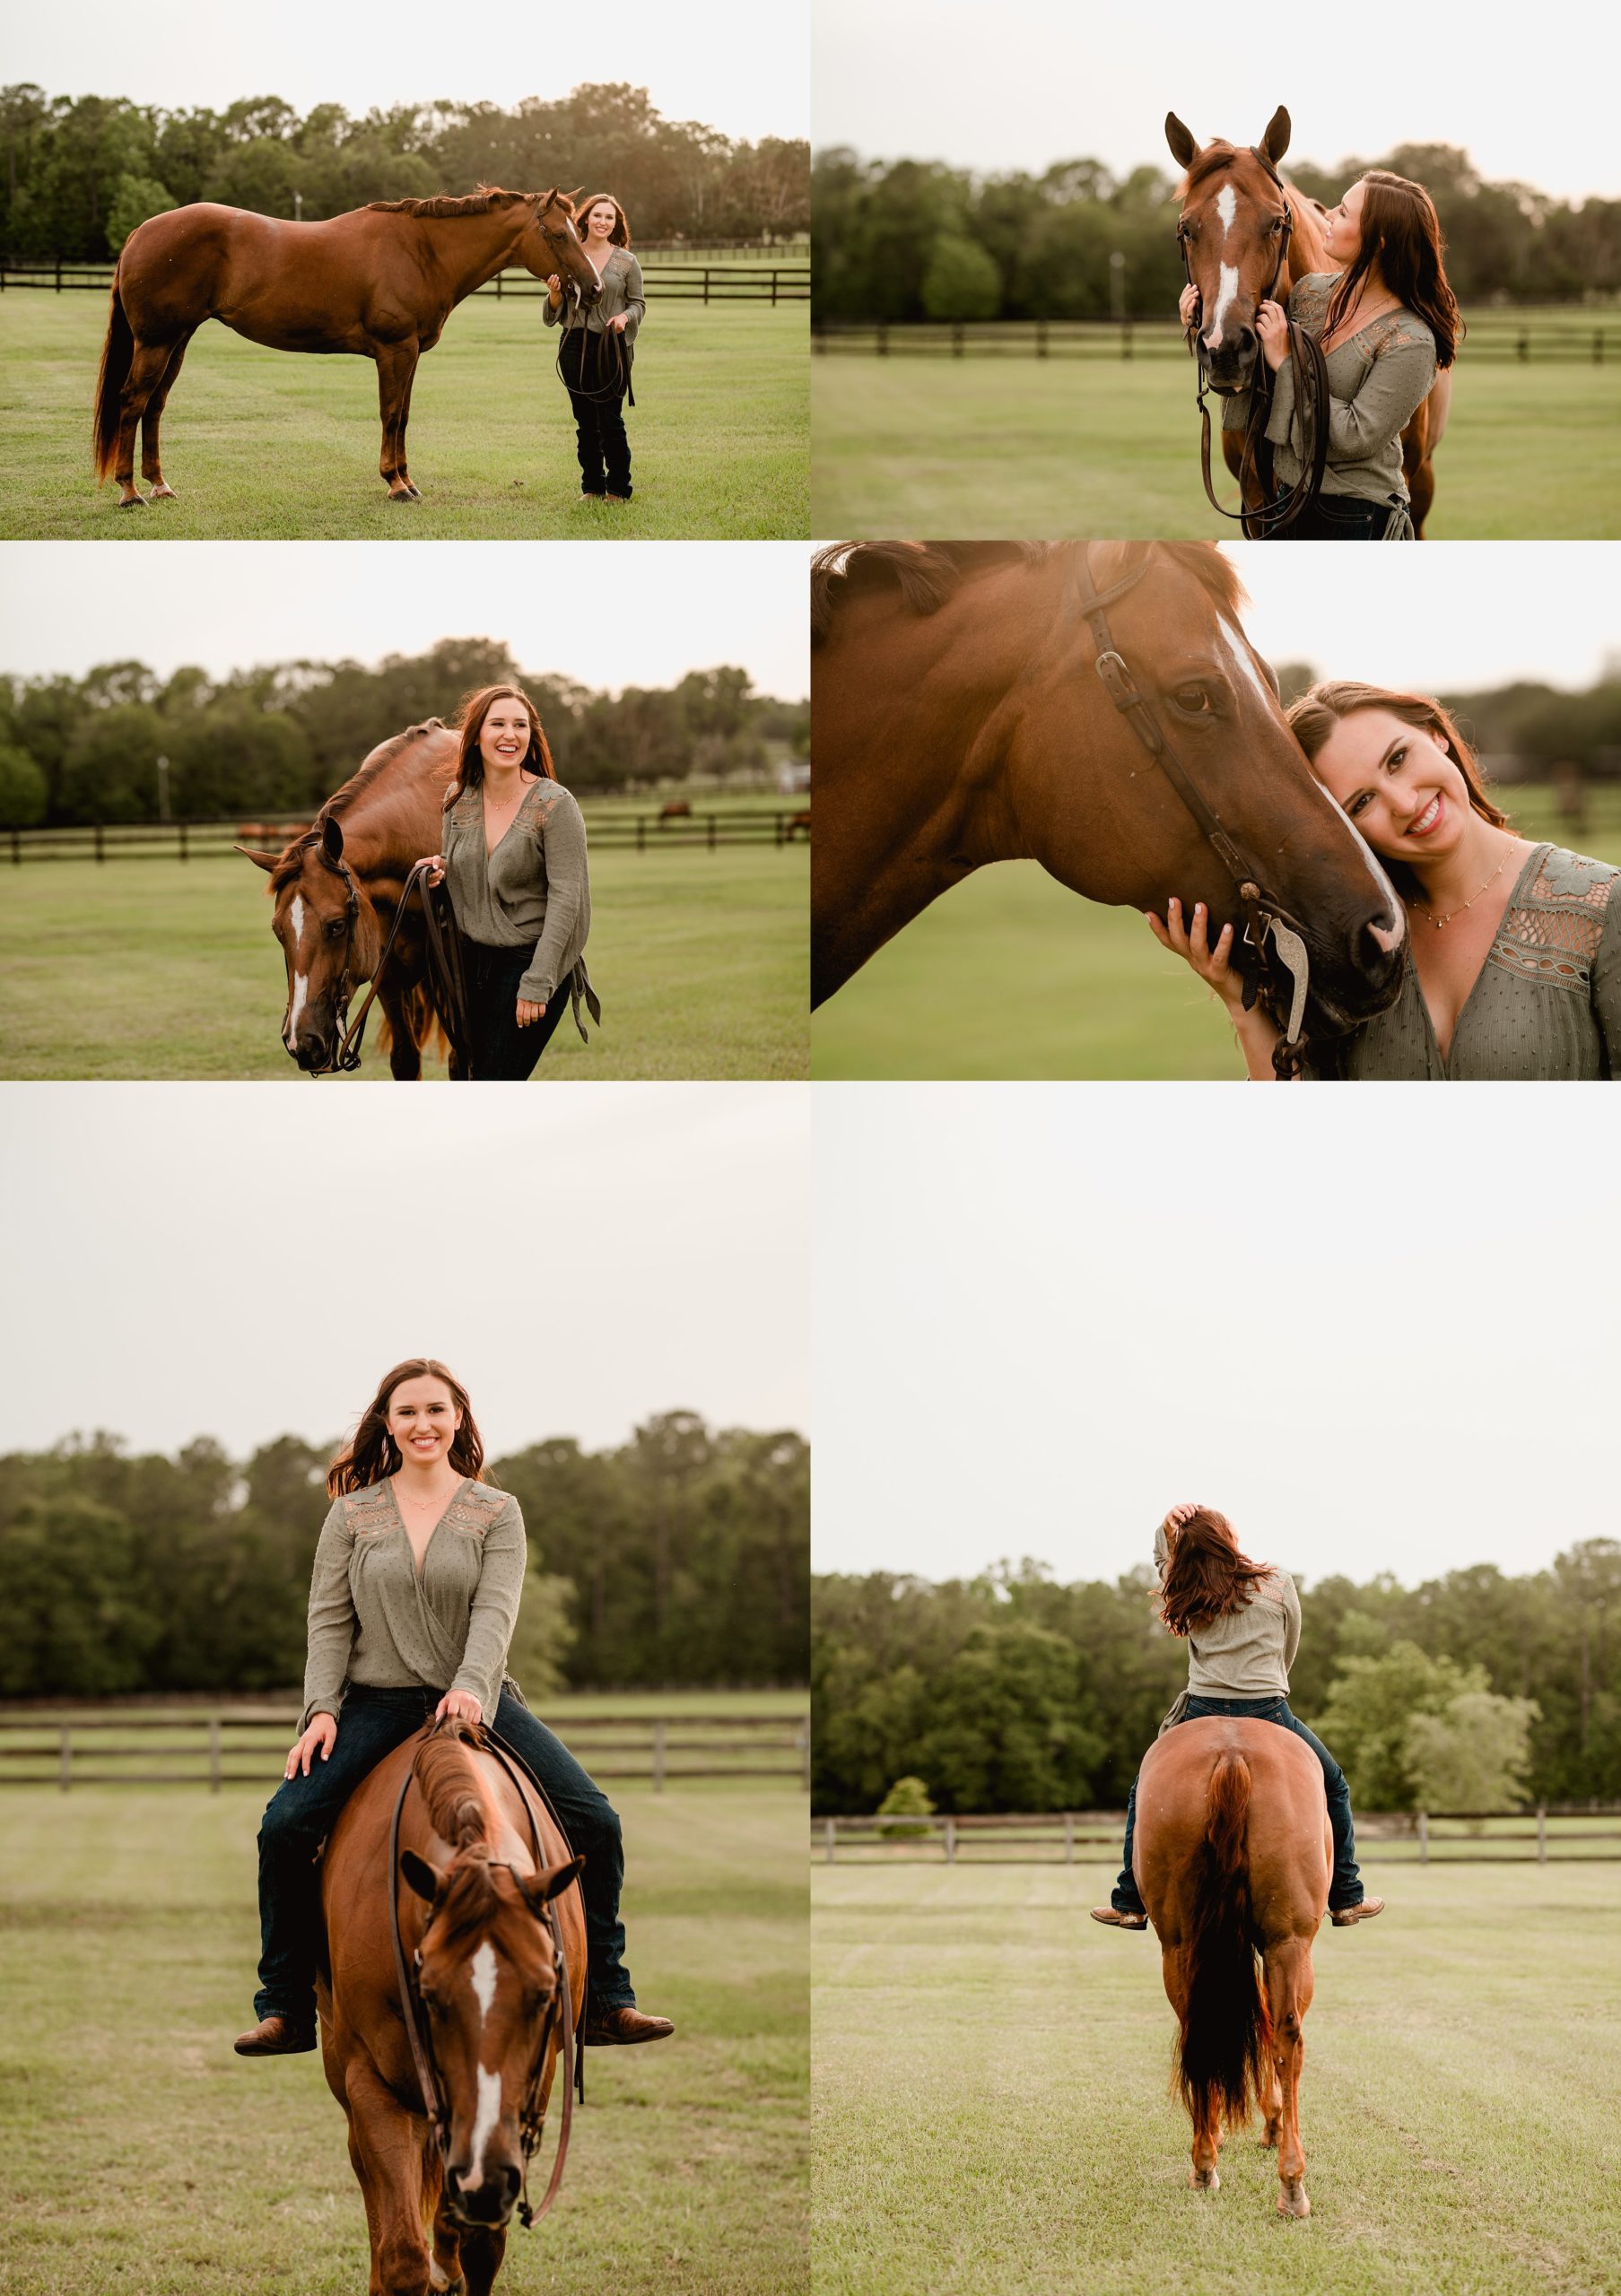 Posing ideas for a girl and her horse